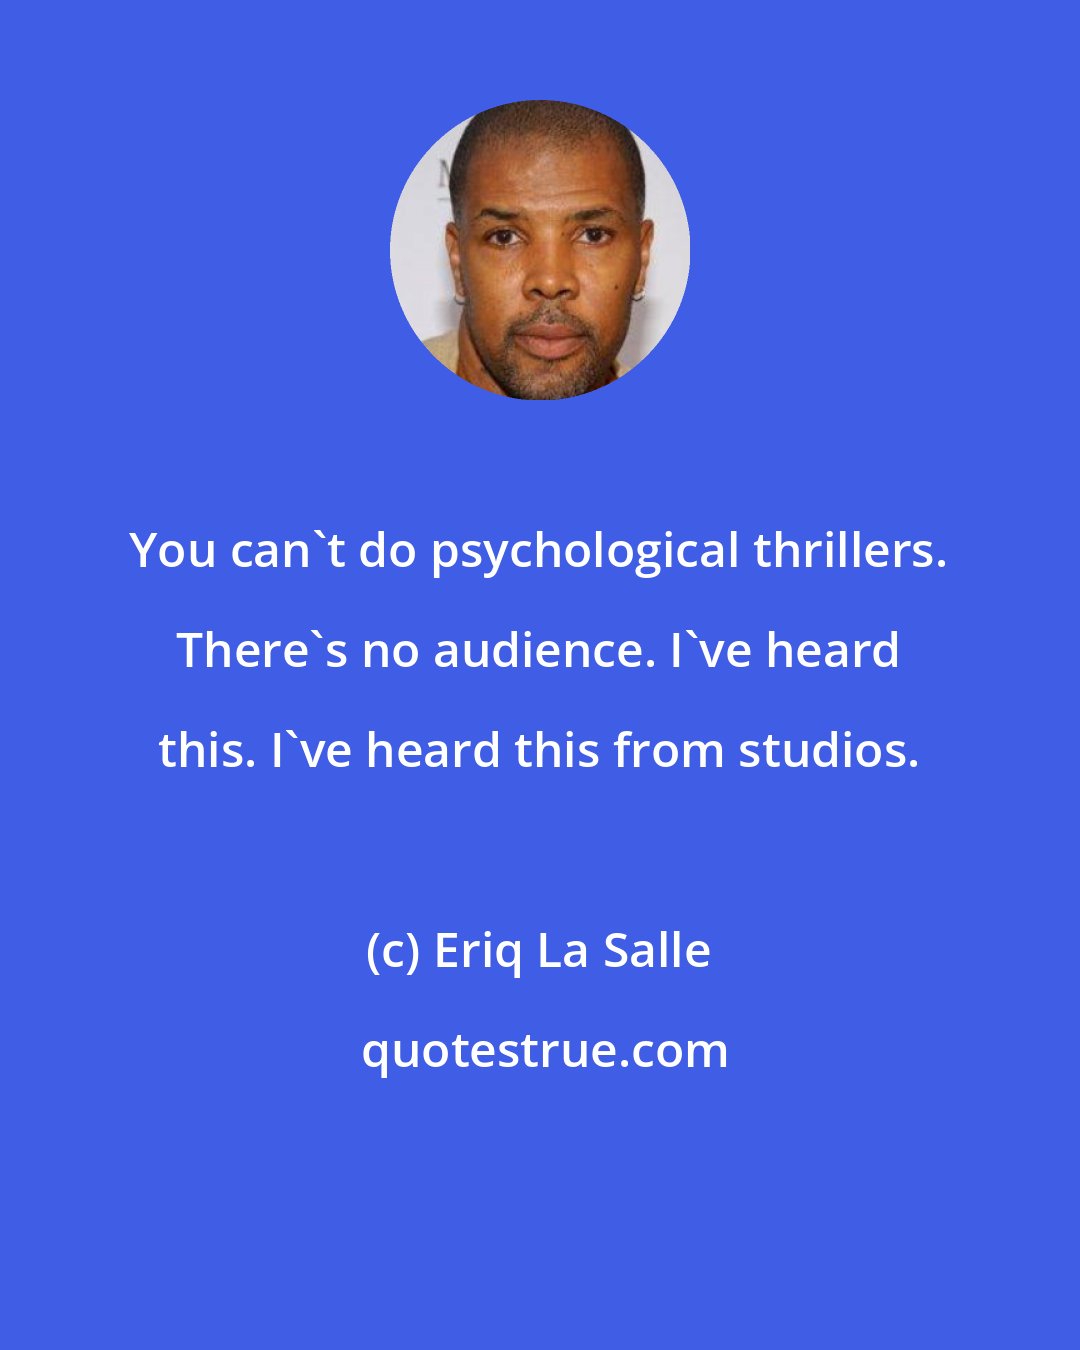 Eriq La Salle: You can't do psychological thrillers. There's no audience. I've heard this. I've heard this from studios.